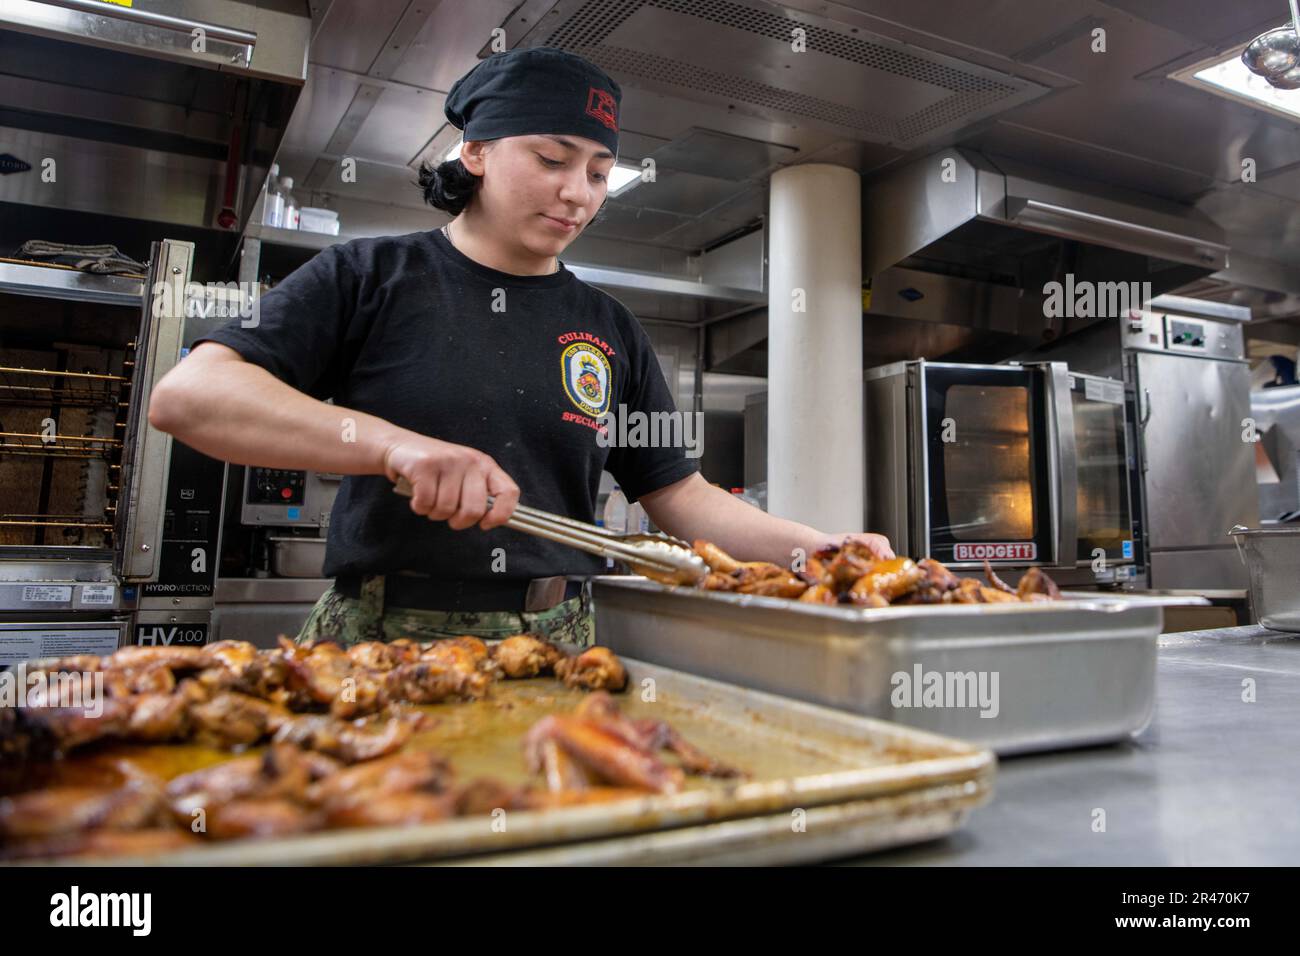 230324-N-MG537-3054 ATLANTIC OCEAN (March 24, 2023) Culinary Specialist Sarah Amaya prepares chicken for diner aboard the Arleigh Burke-class guided missile destroyer USS Bulkeley (DDG 84), March 23, 2023. Bulkeley routinely operates in the U.S. Naval Forces Europe and Africa area of operations, employed by U.S. Sixth Fleet to defend U.S., Allied and Partner interests. Stock Photo